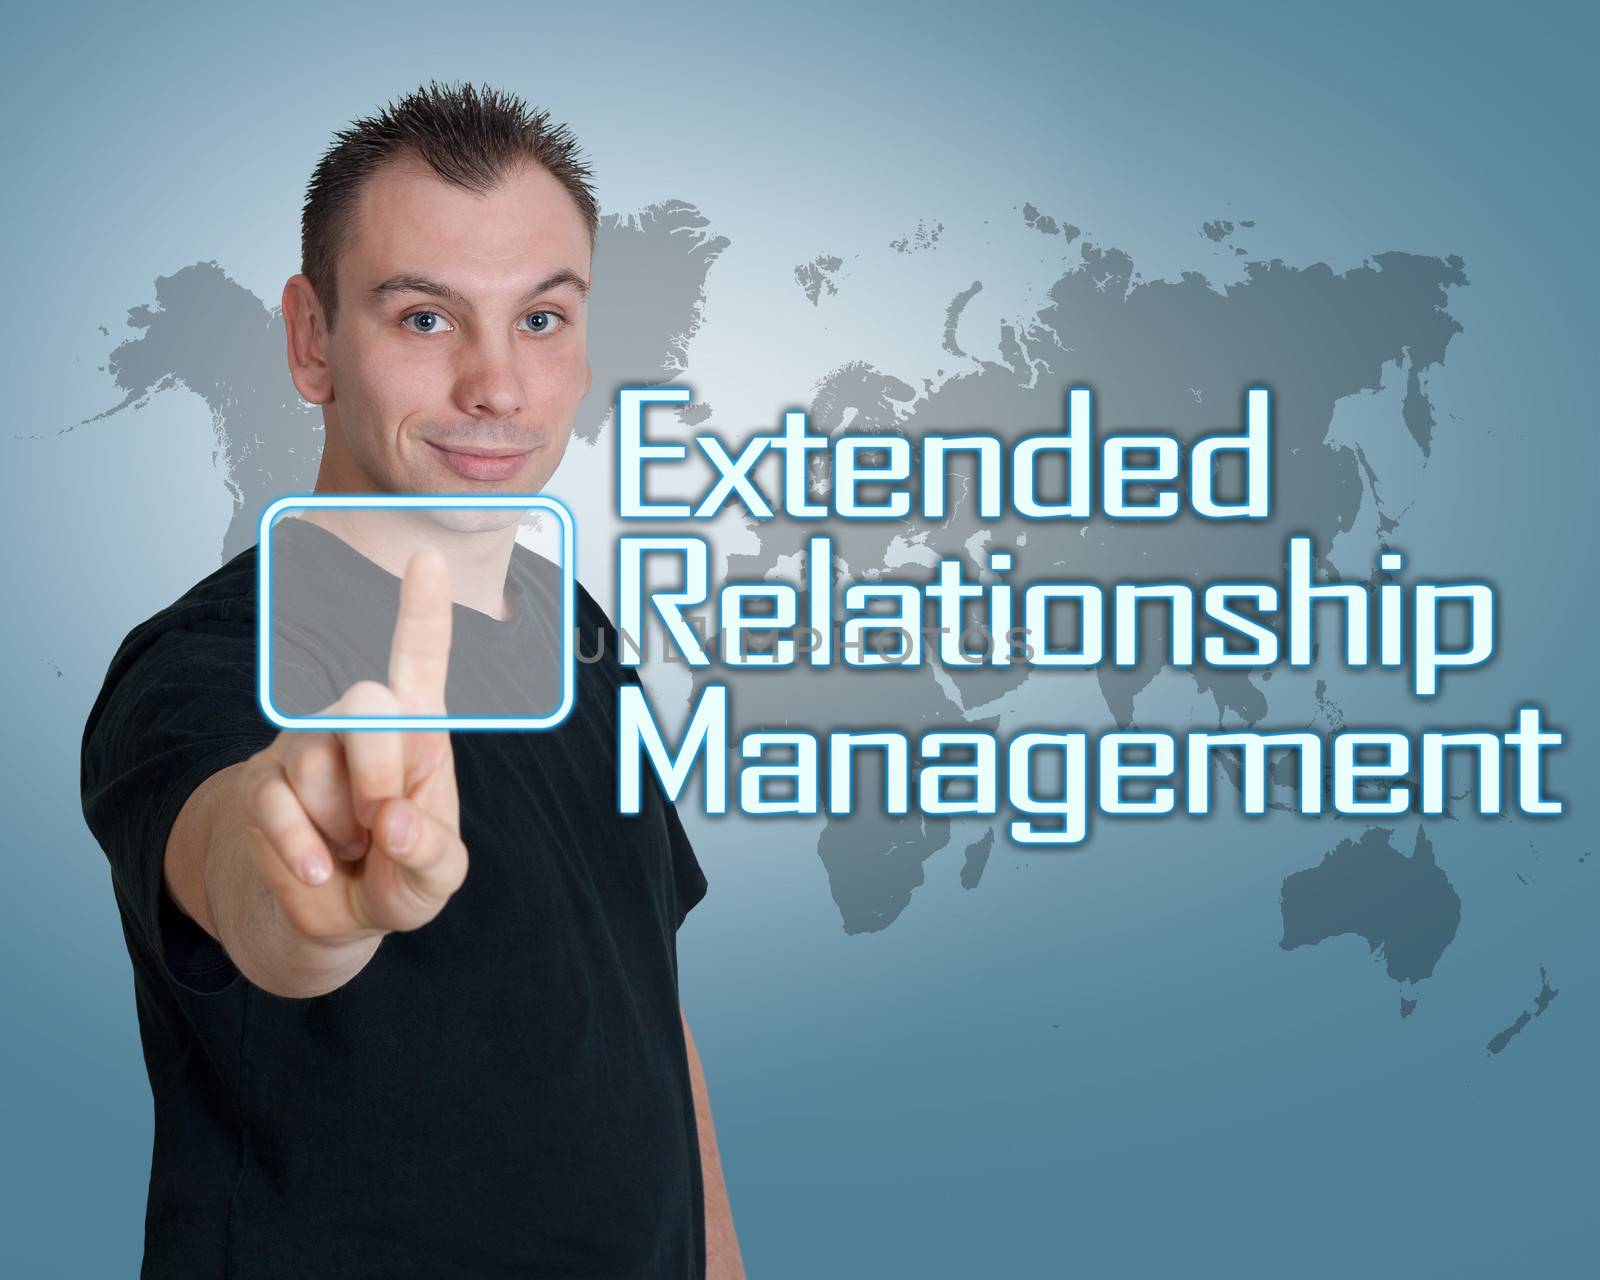 Young man press digital Extended Relationship Management button on interface in front of him